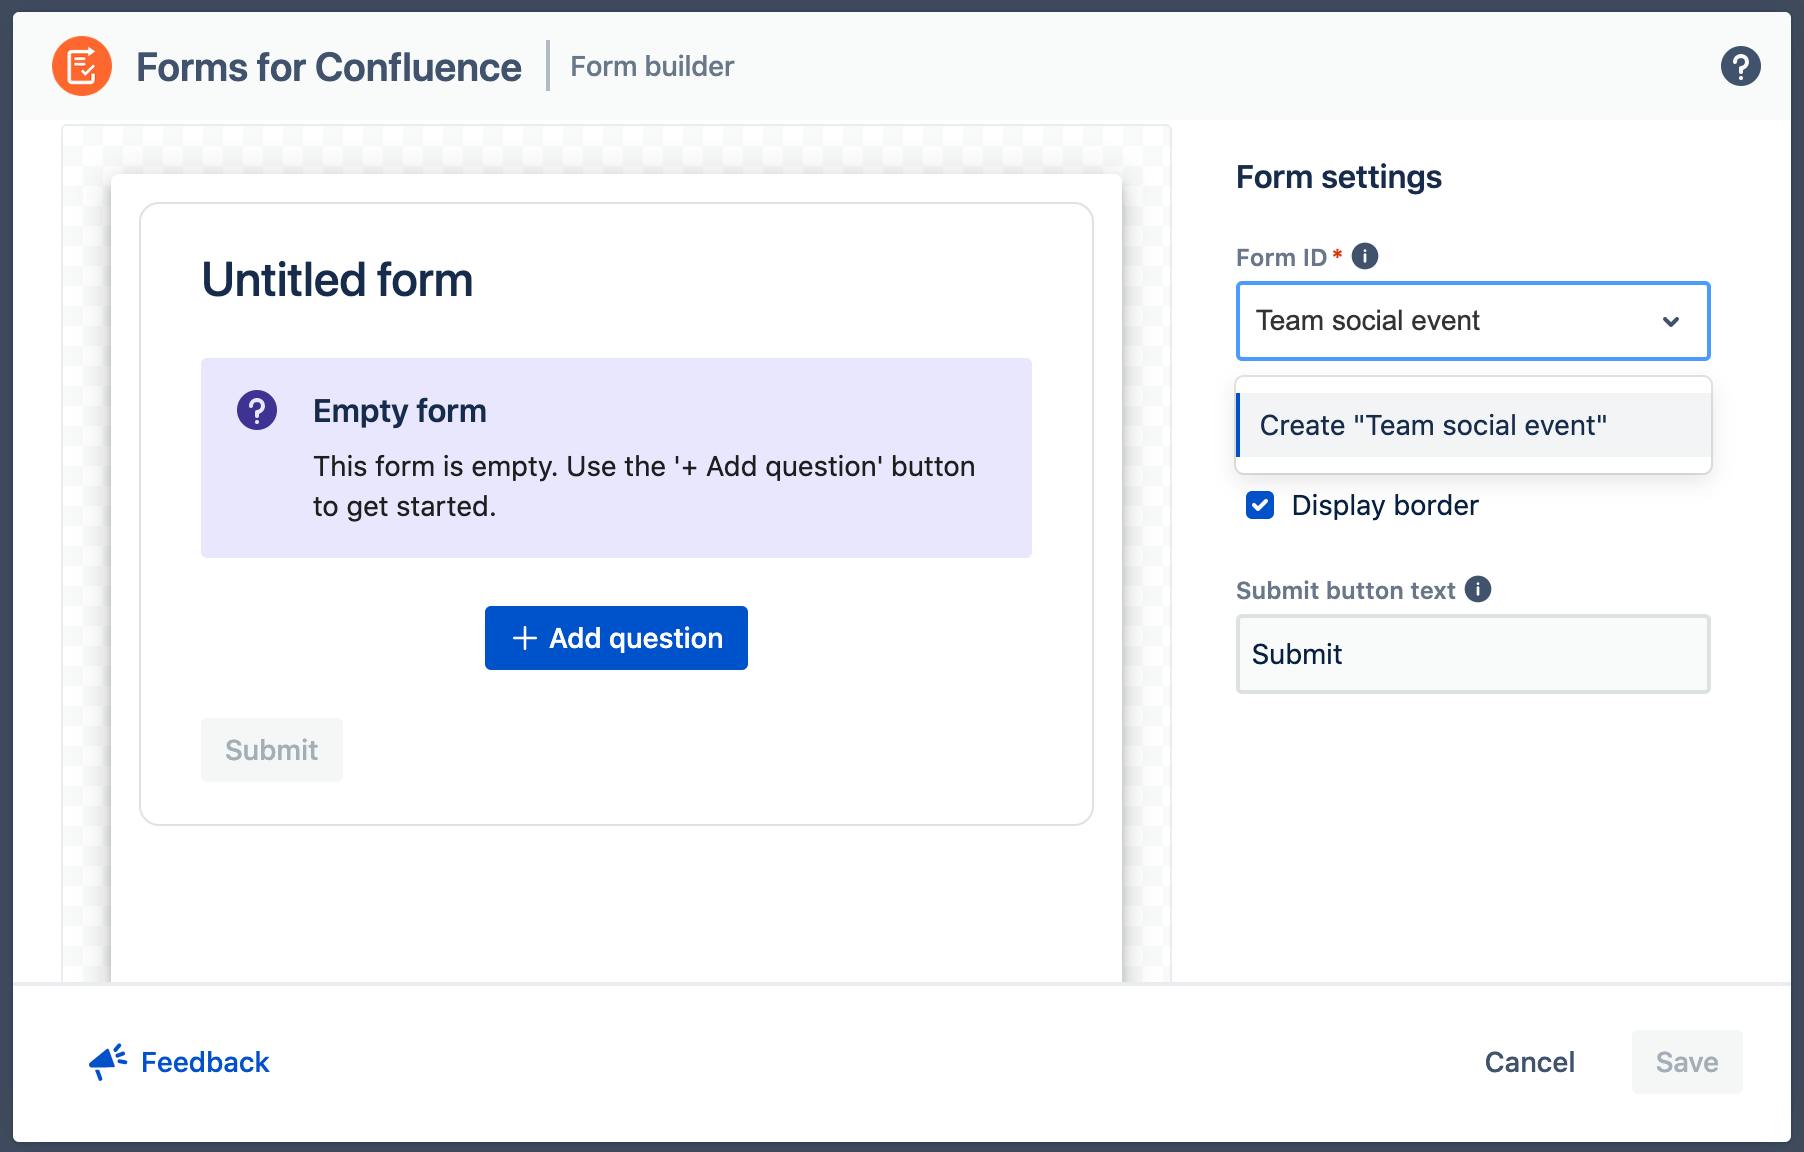 Form builder in Confluence